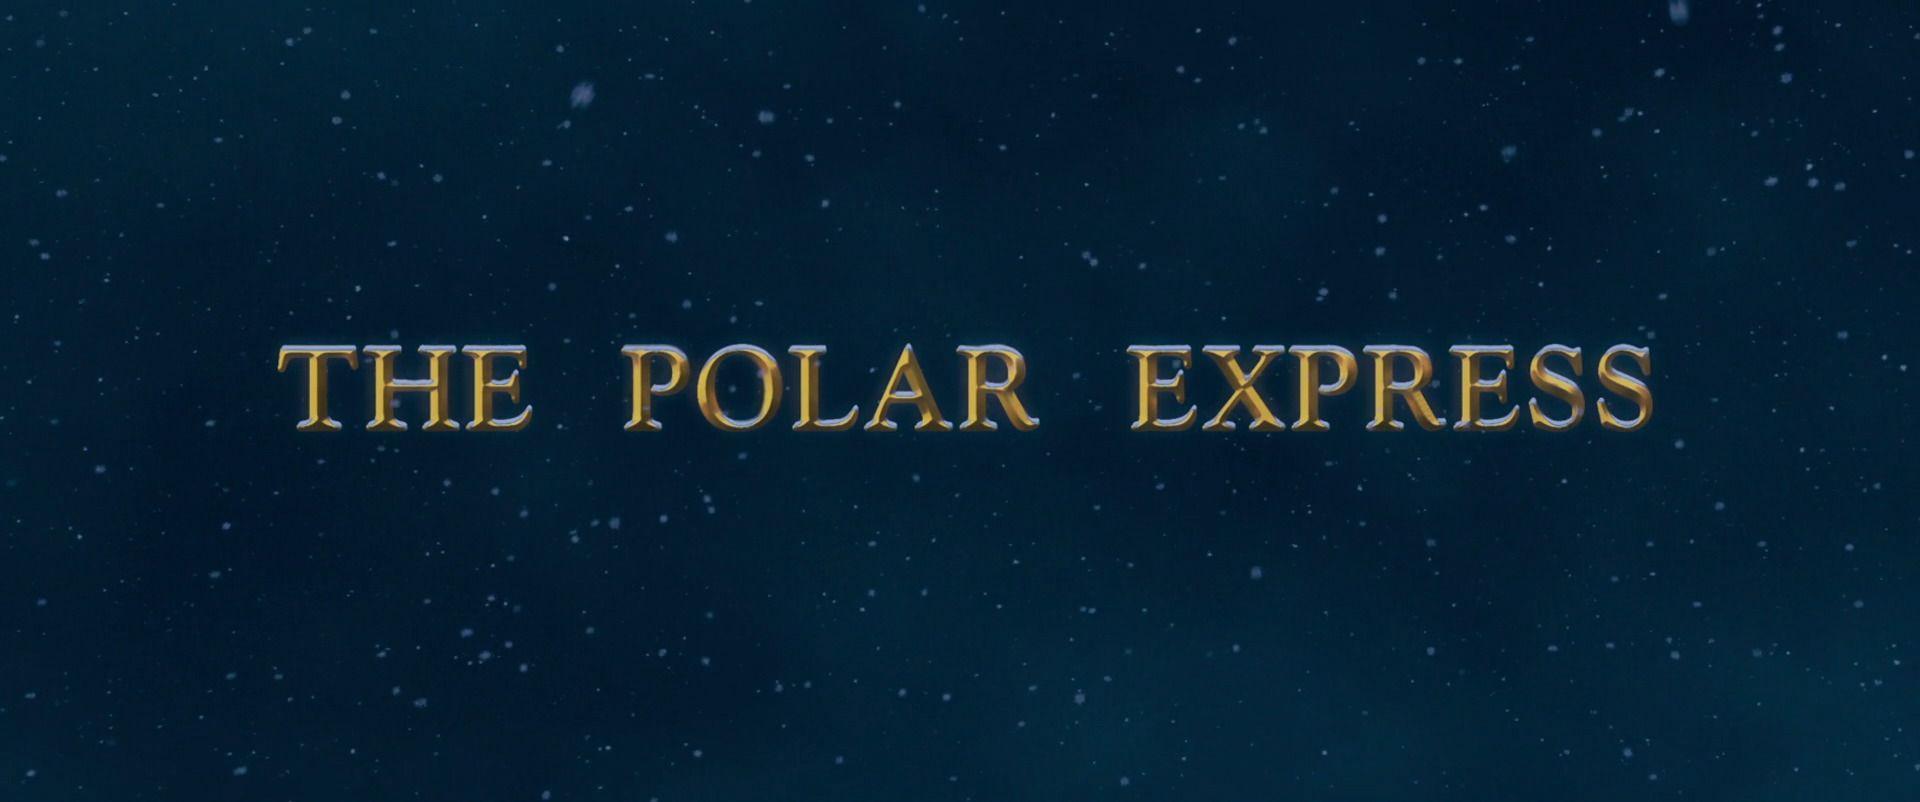 The Polar Express wallpaper, Movie, HQ The Polar Express picture